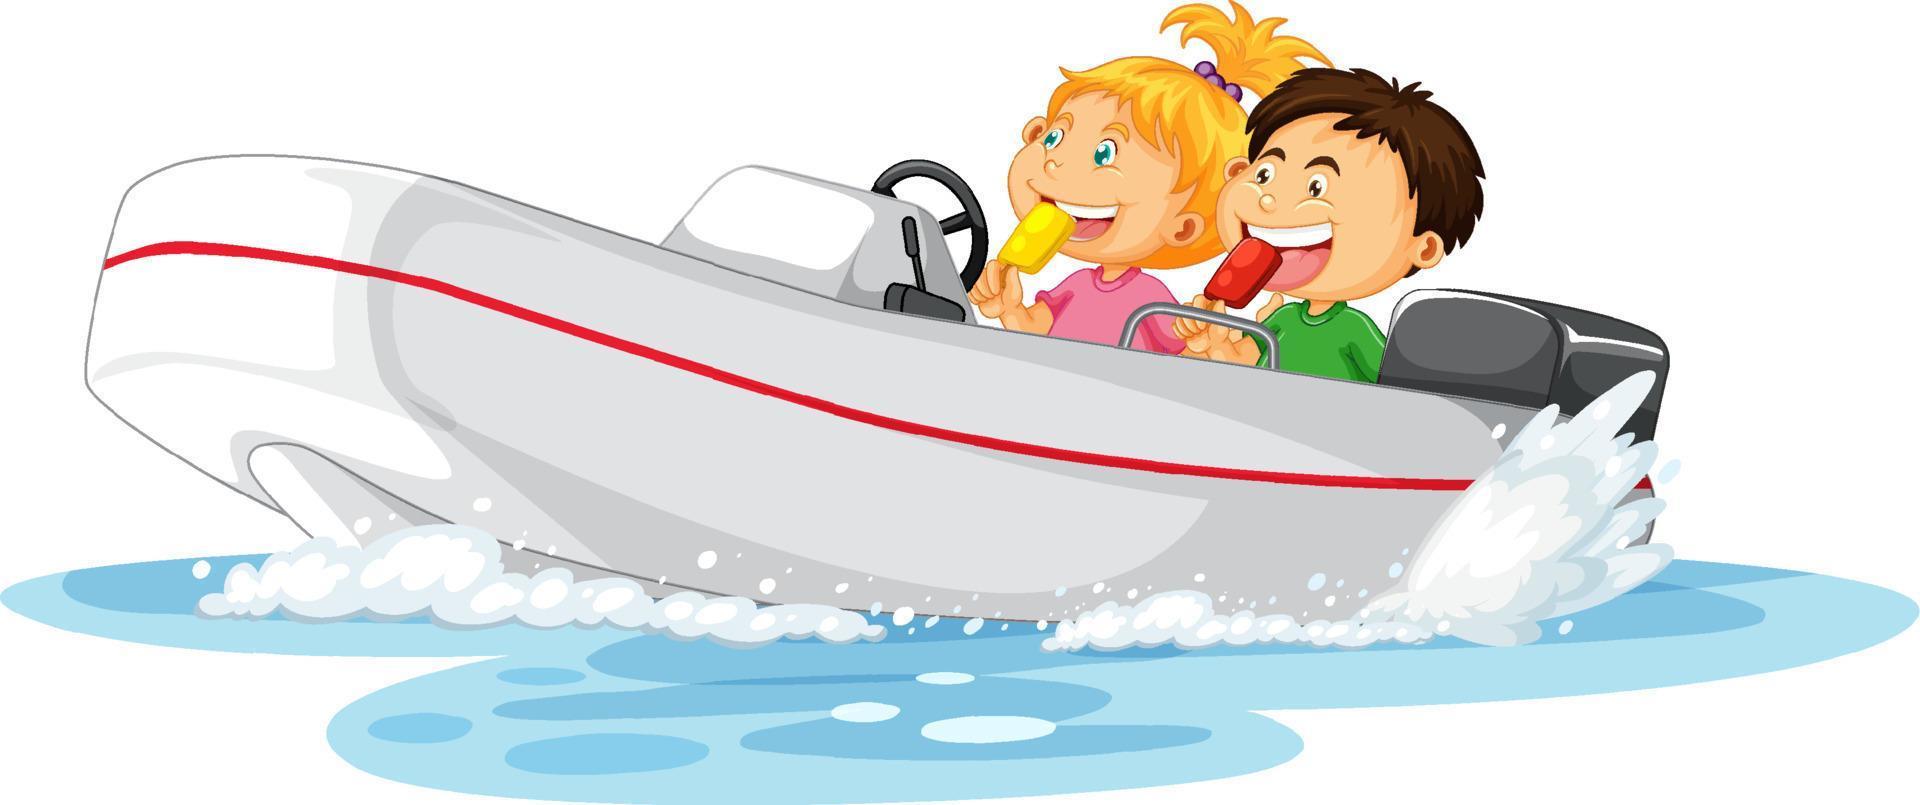 Couple kids on dinghy boat vector